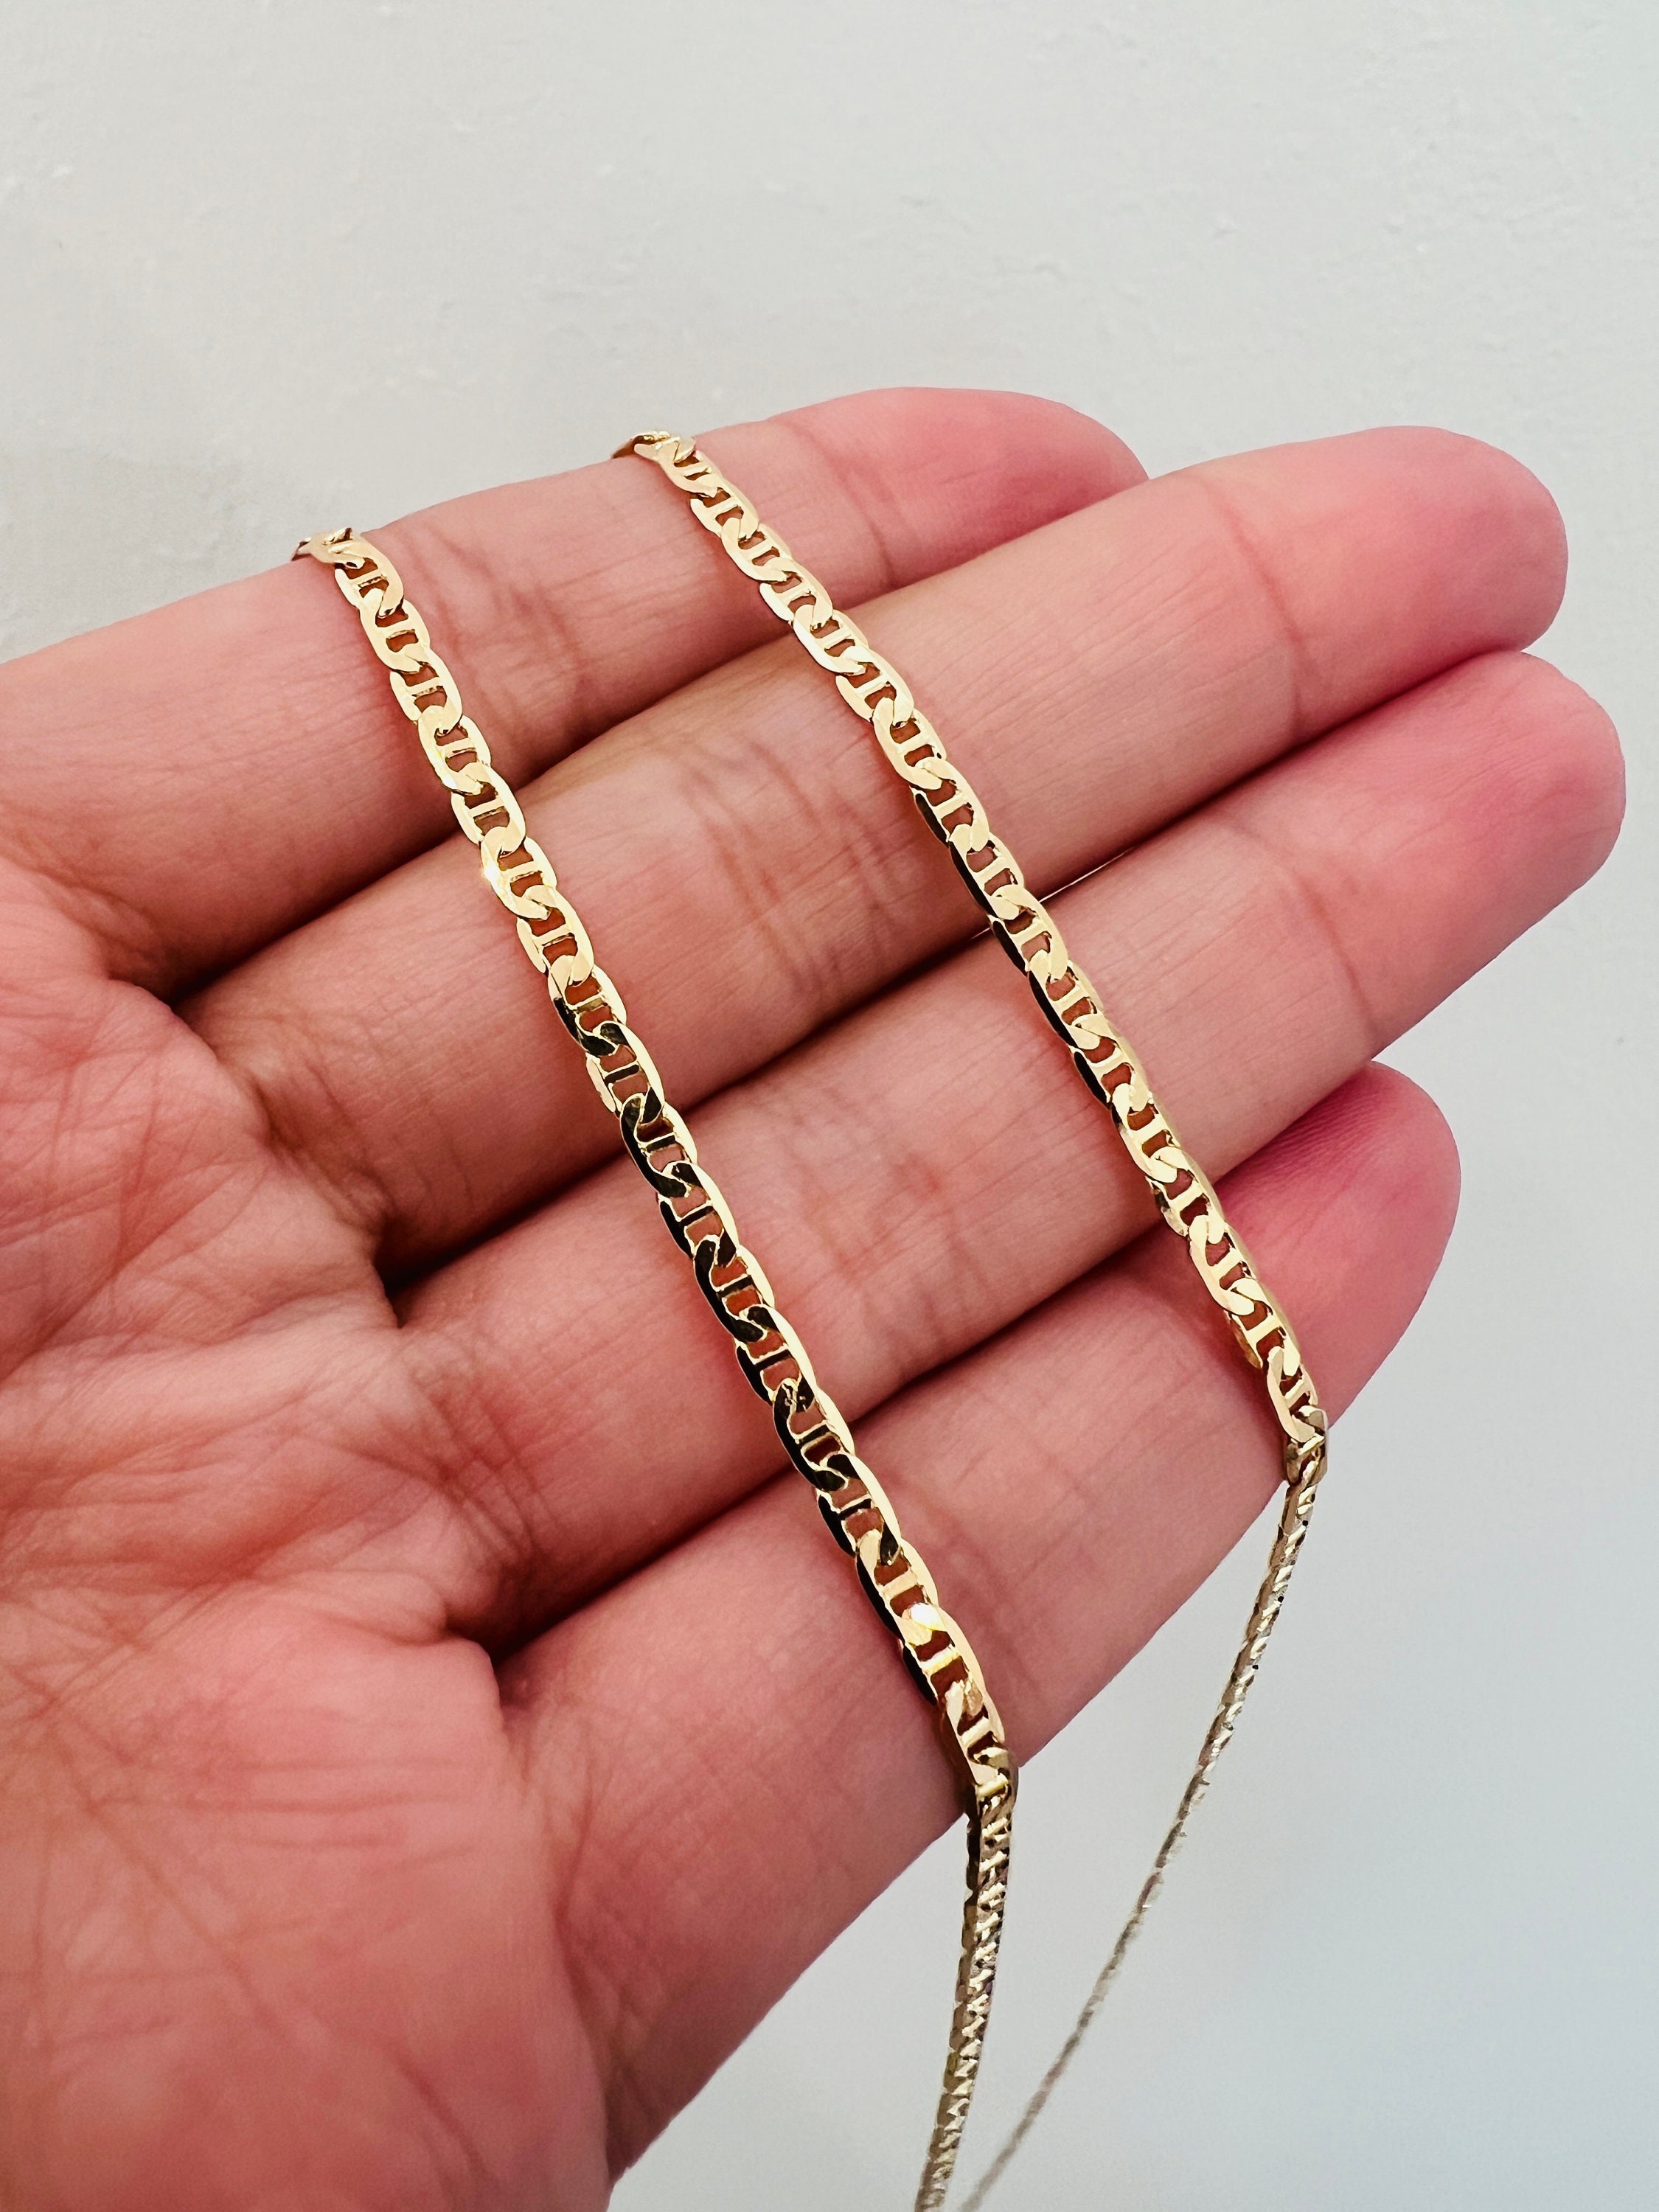 Gold Filled Fancy Mariners Chain Necklace - Keola